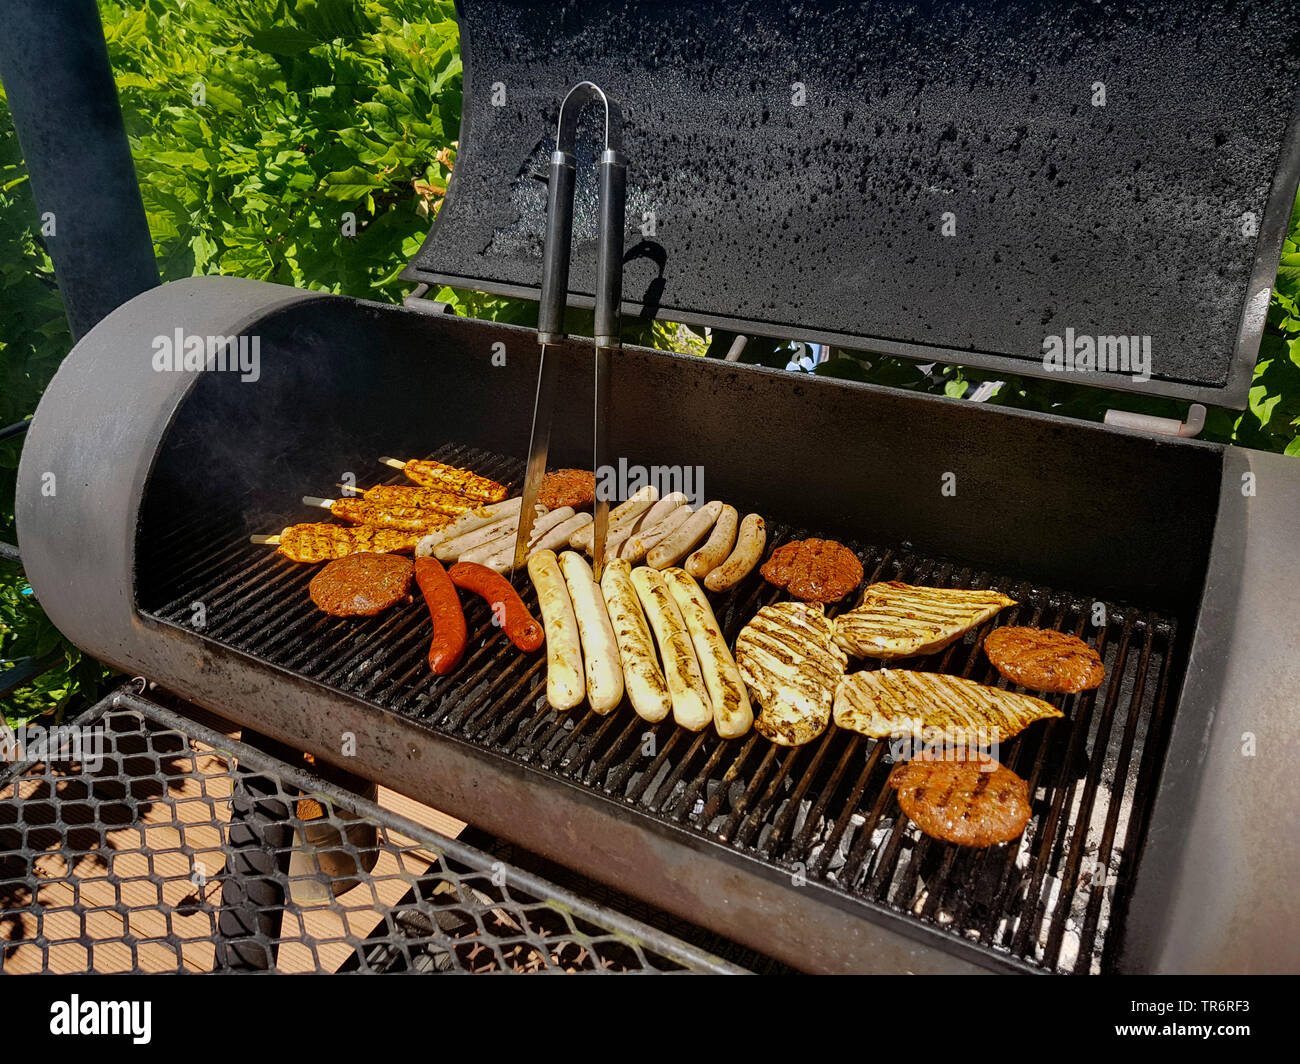 Large Barbecue Smoker Grill At The Park Meat Prepared In Barbecue Smoker  Stock Photo - Download Image Now - iStock